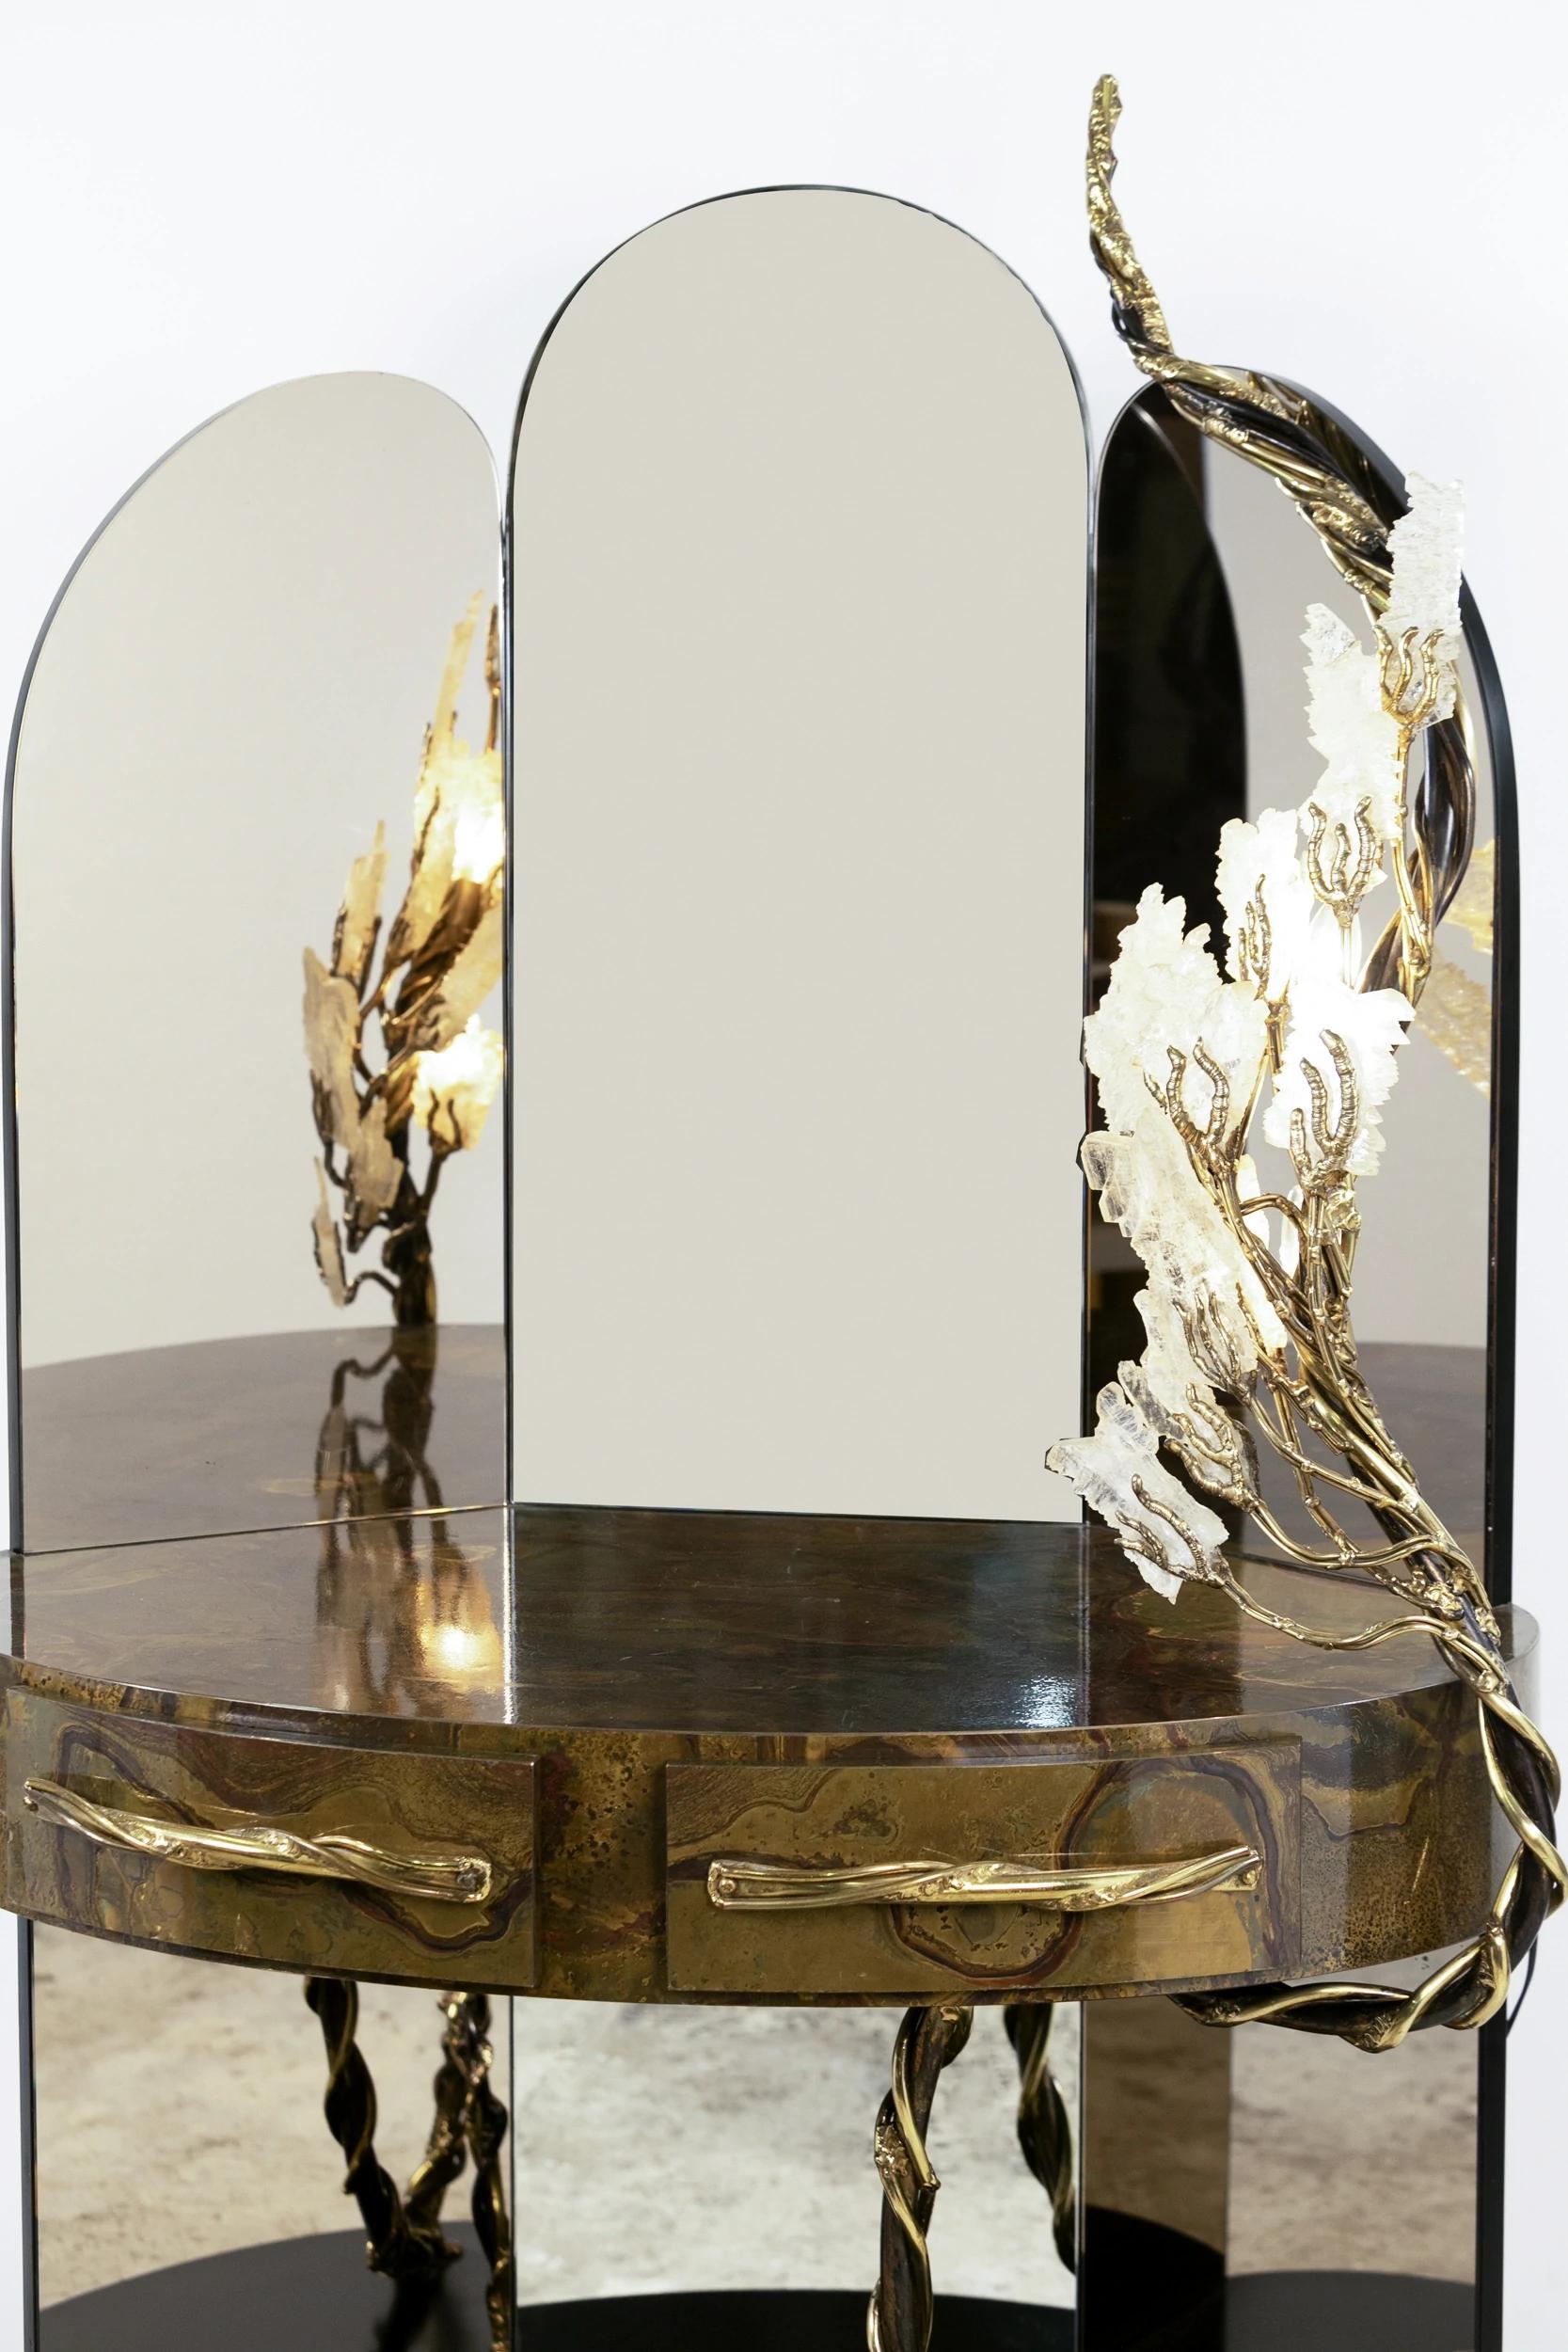 Large dressing table By Richard Faure, France circa 1980.
The combination of three mirrors (the middle one is of course colorless), the beautiful gypsum tree light sculpture and the etched brass tray with curved drawer and handles are a unique work